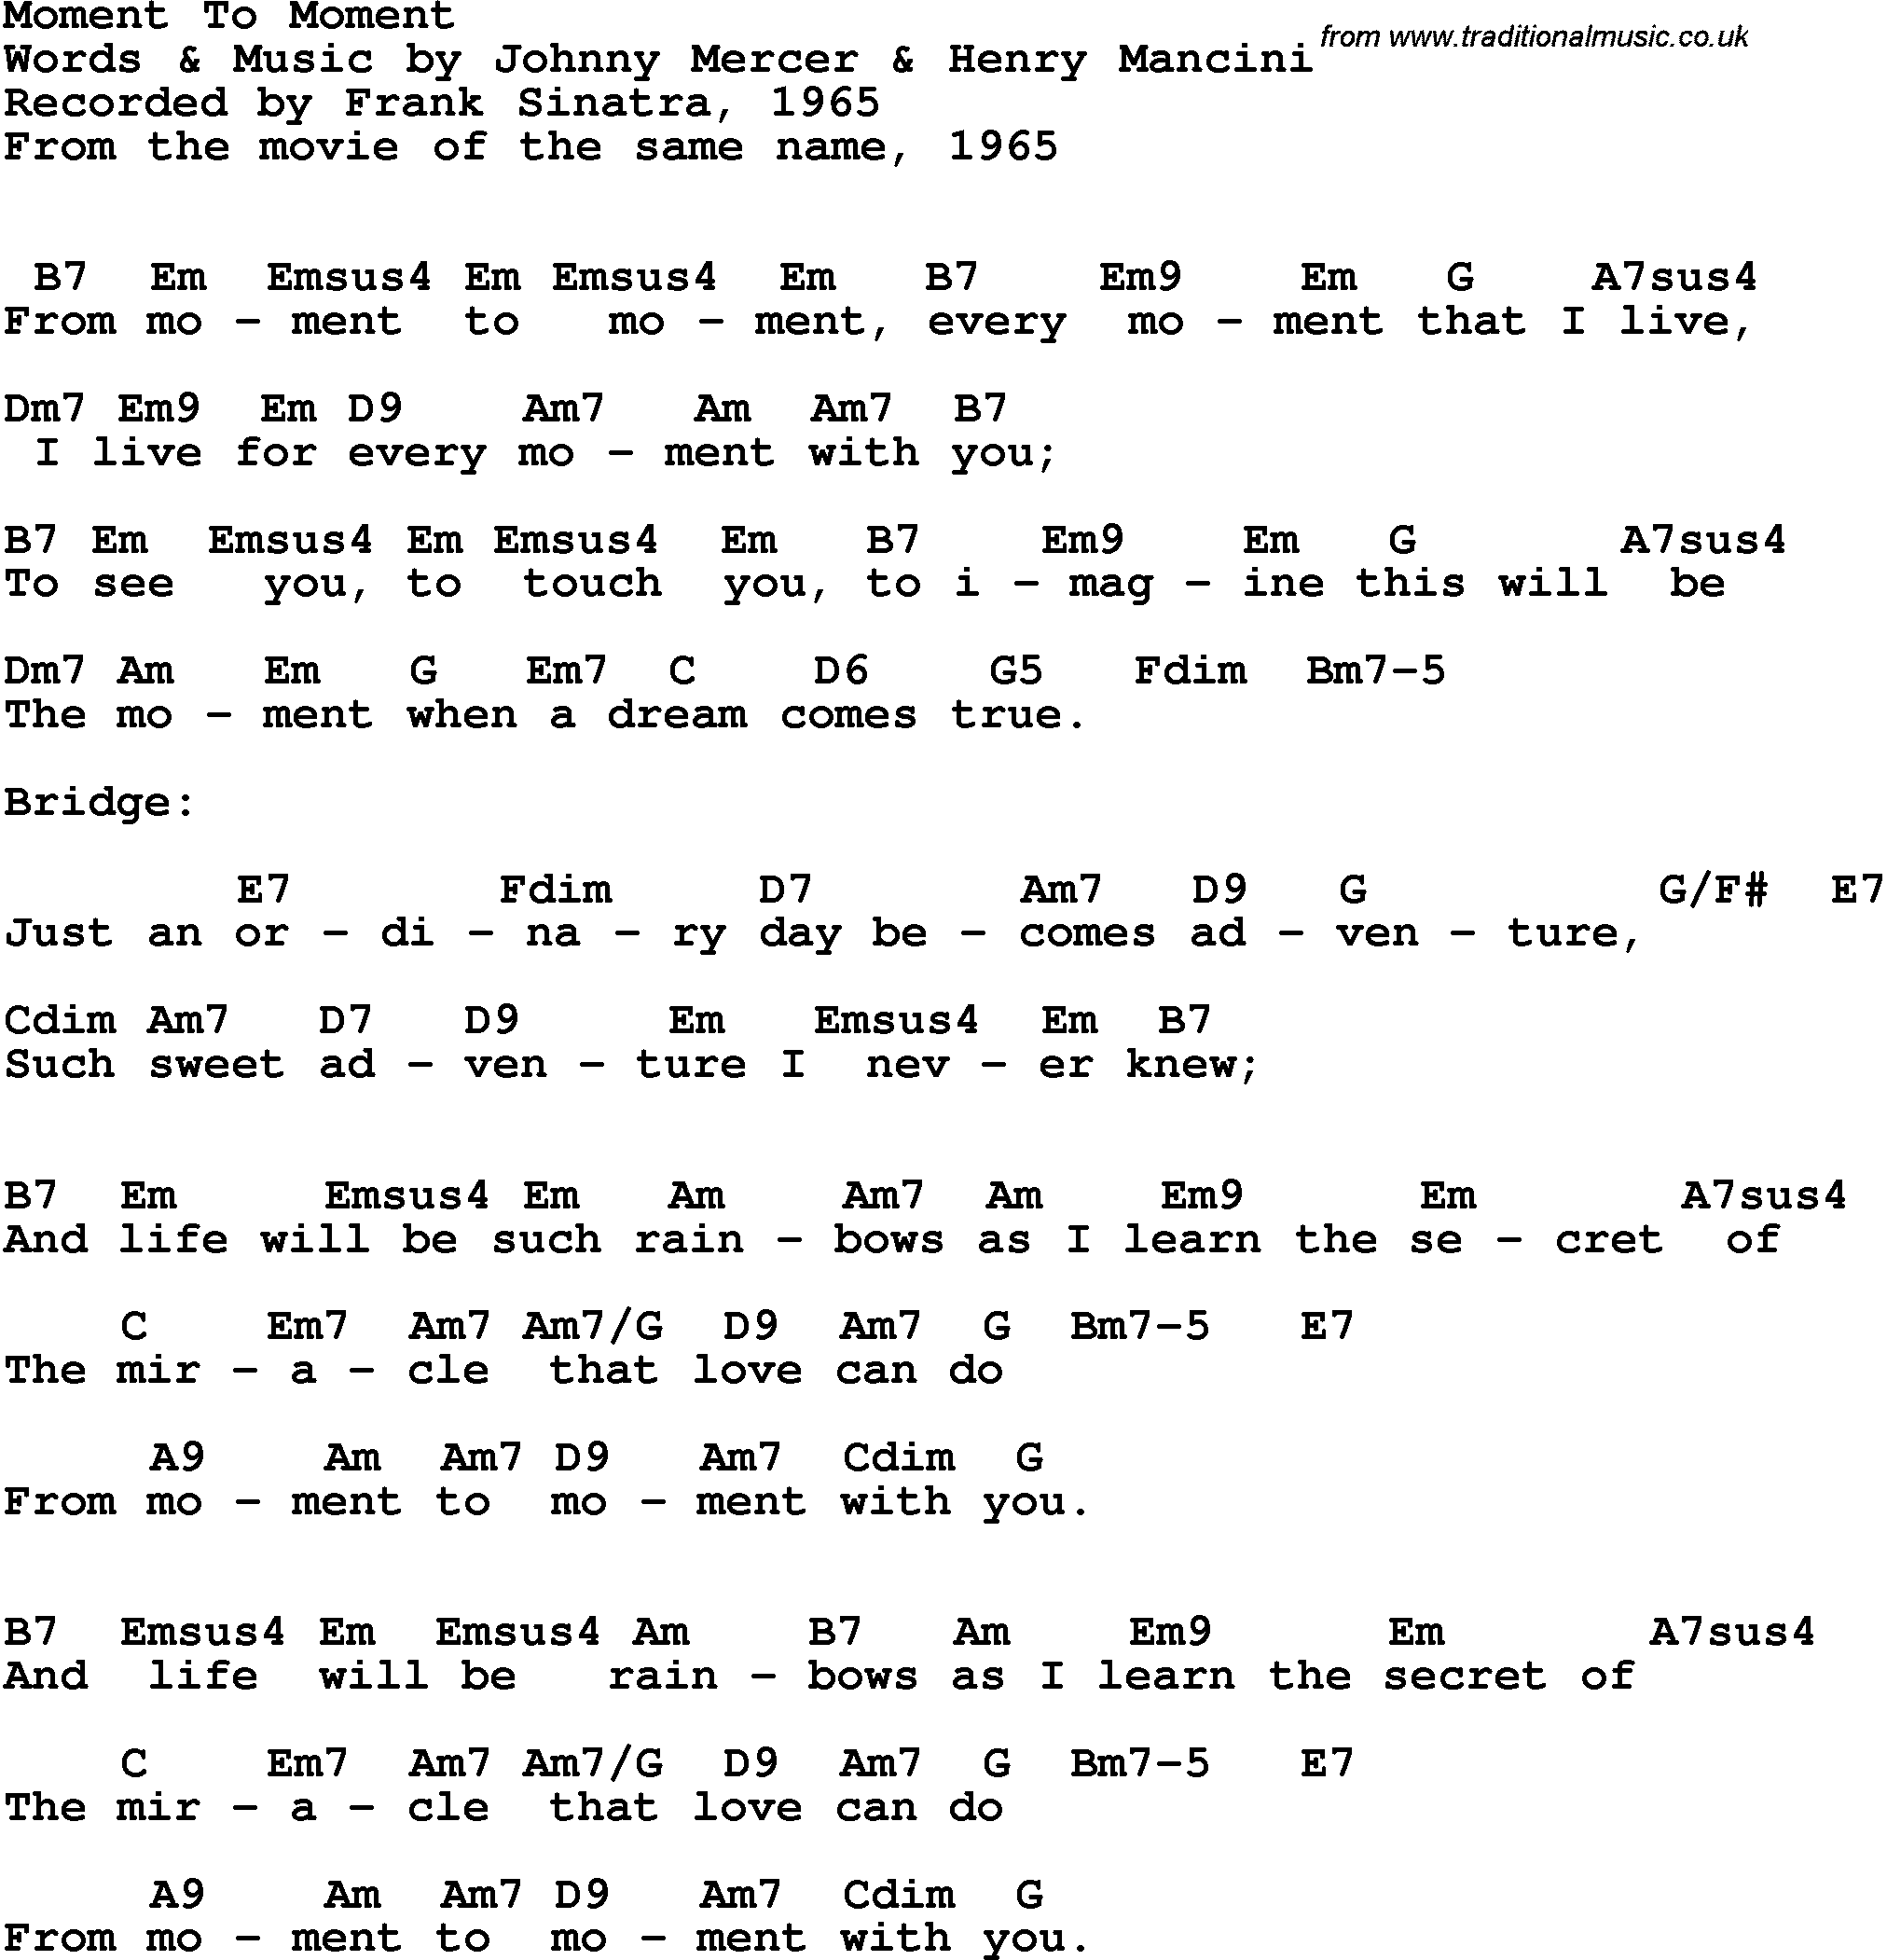 Song Lyrics with guitar chords for Moment To Moment - Frank Sinatra, 1965